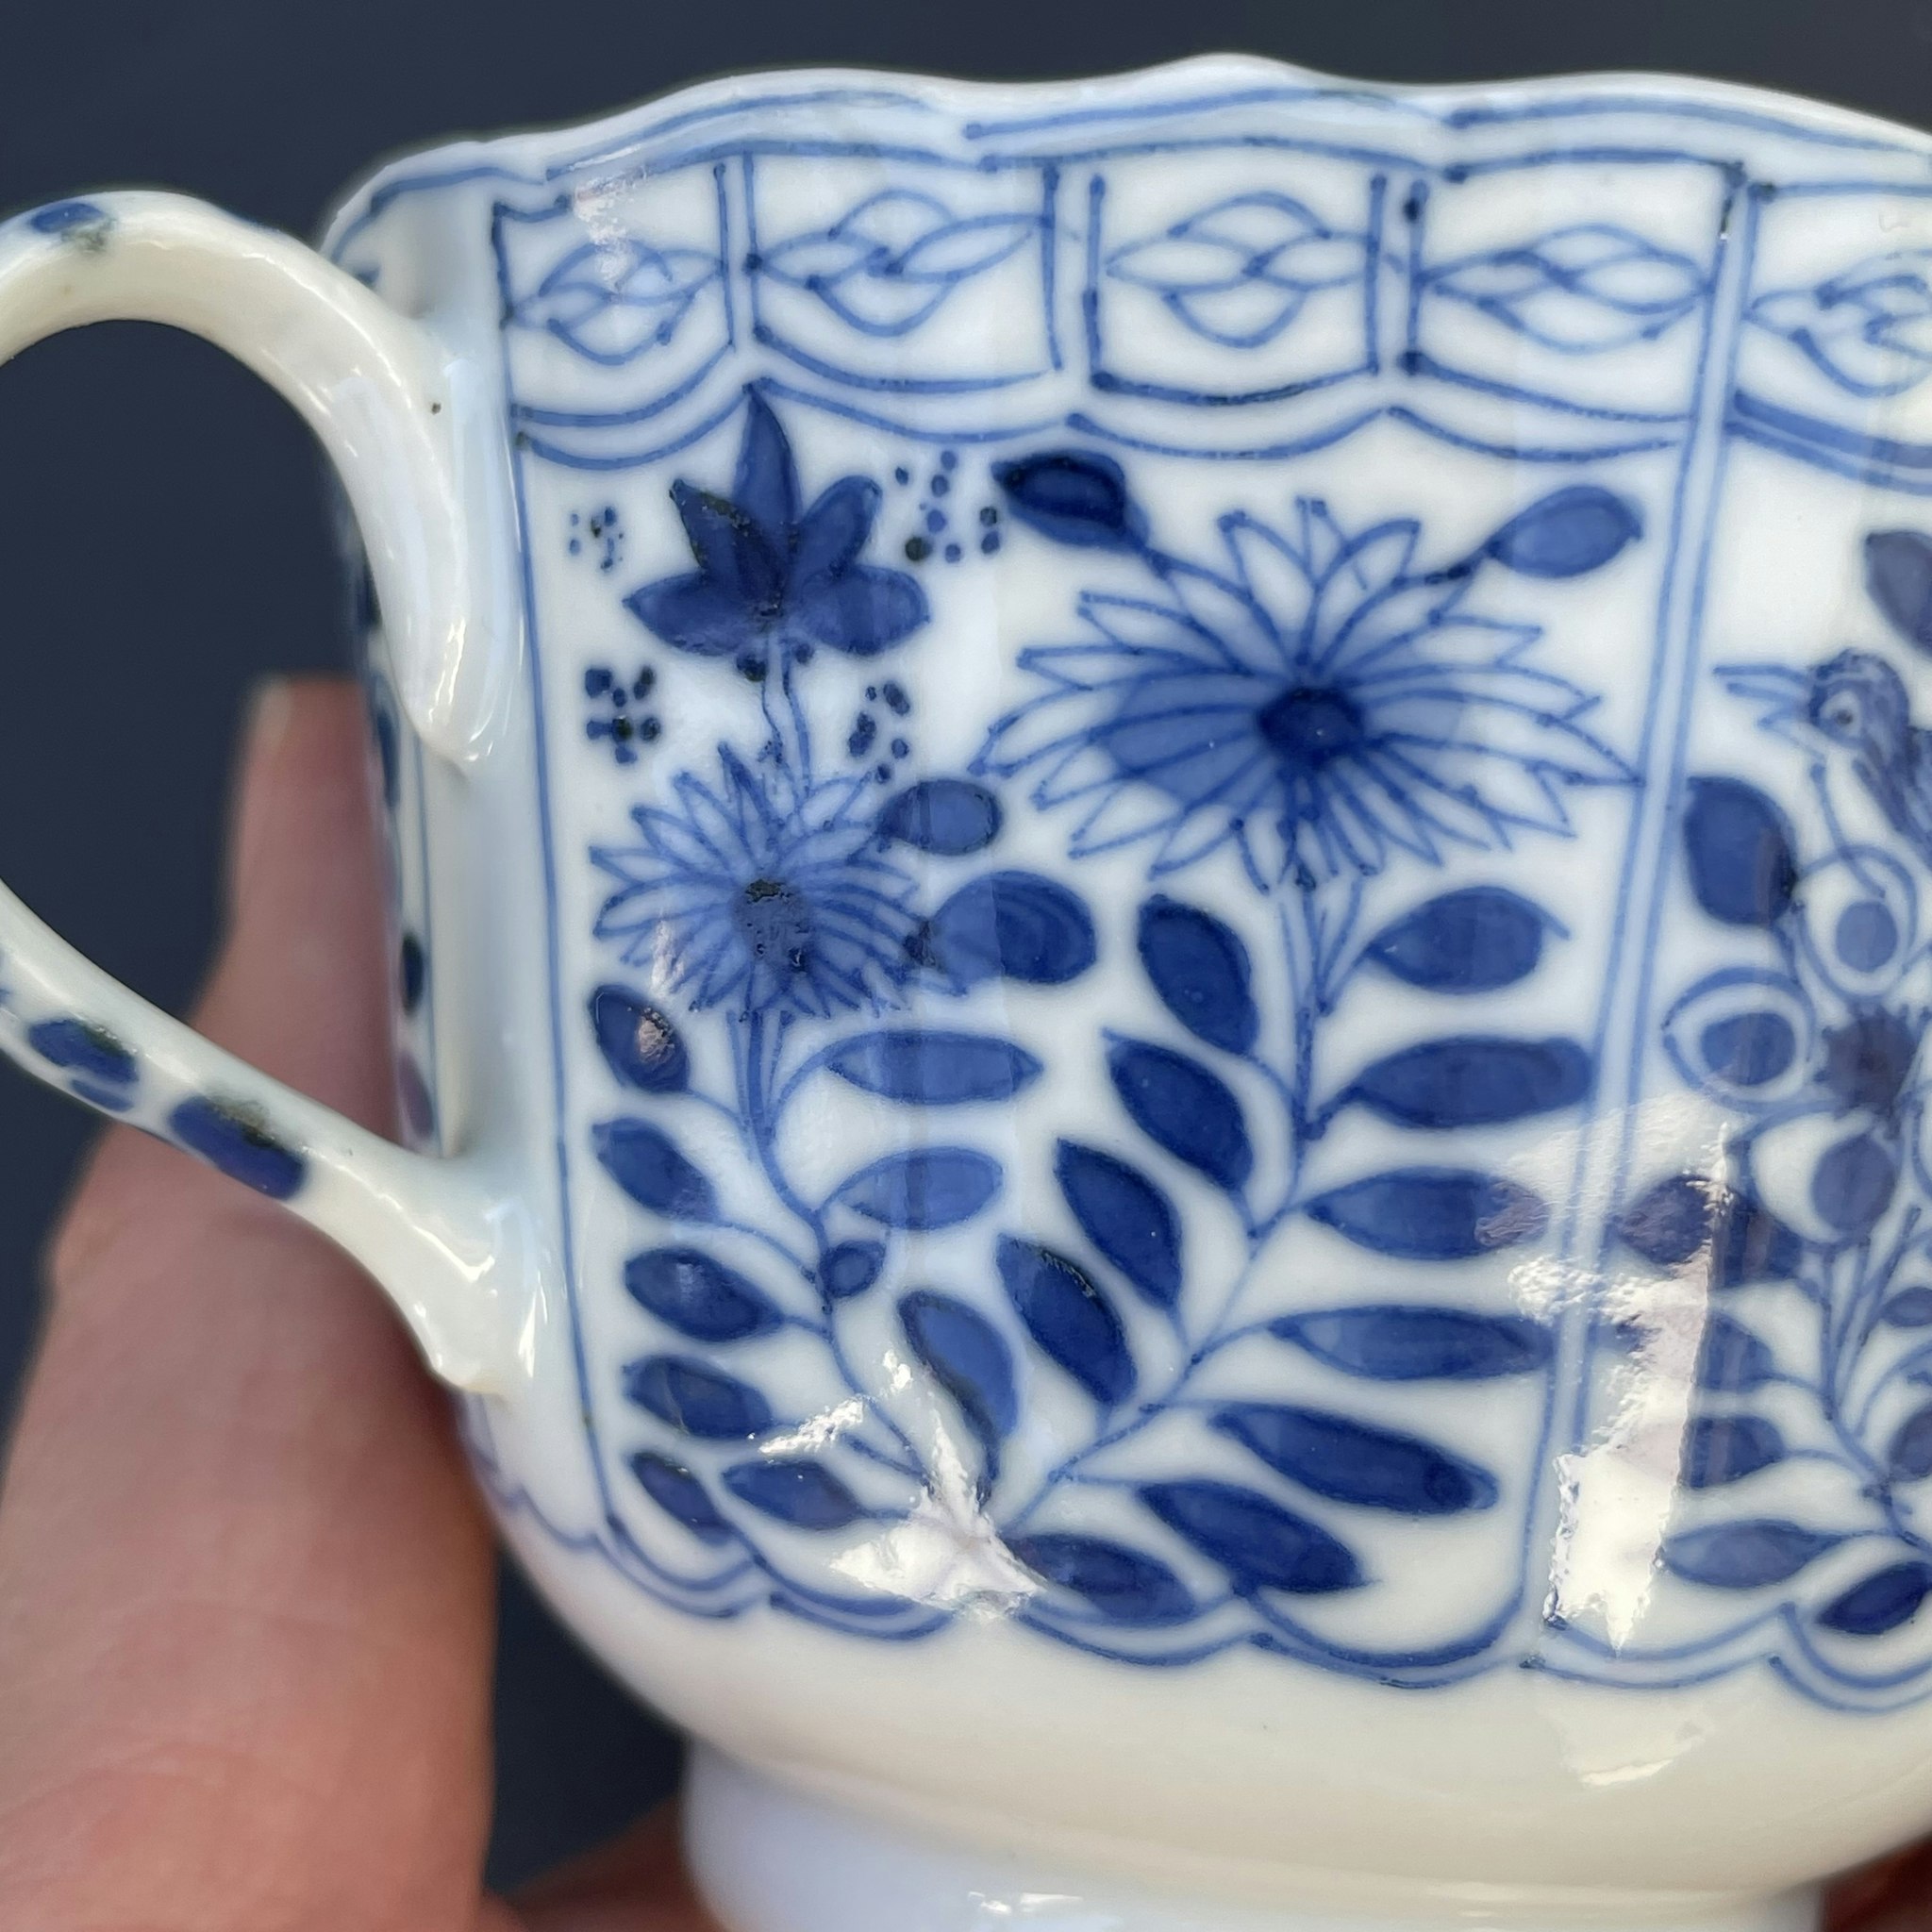 Chinese teacup & saucer in underglazed blue and white, Late Qing Dynasty #1498